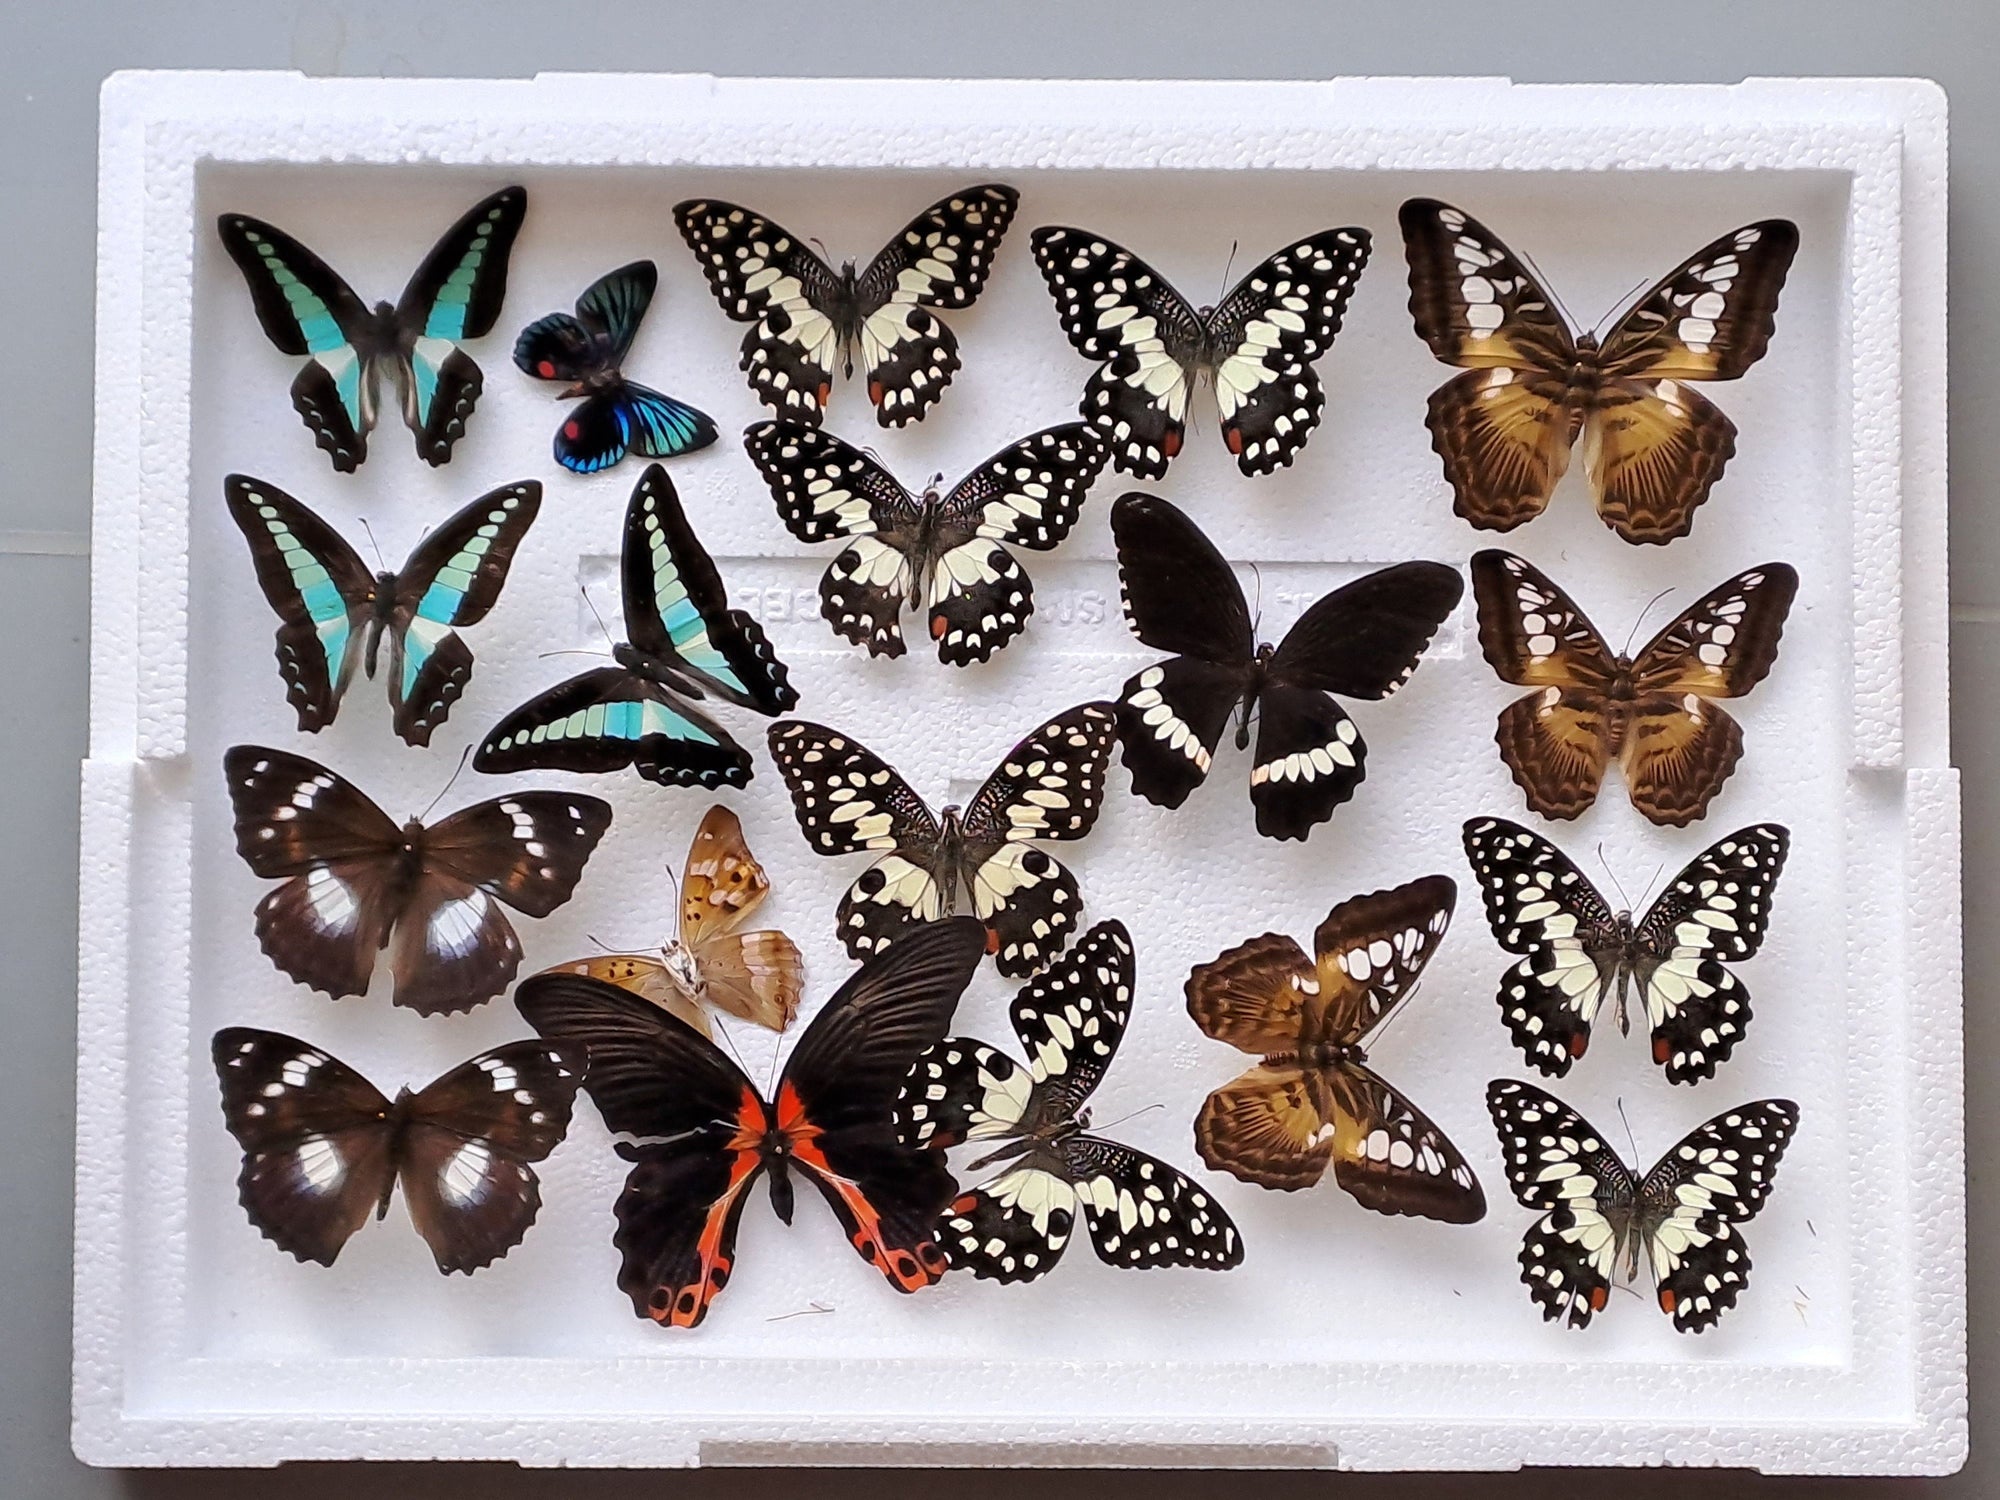 DAMAGED BUTTERFLIES as seen in photo. Broken specimens good for art and craft projects (BOX No. 19)